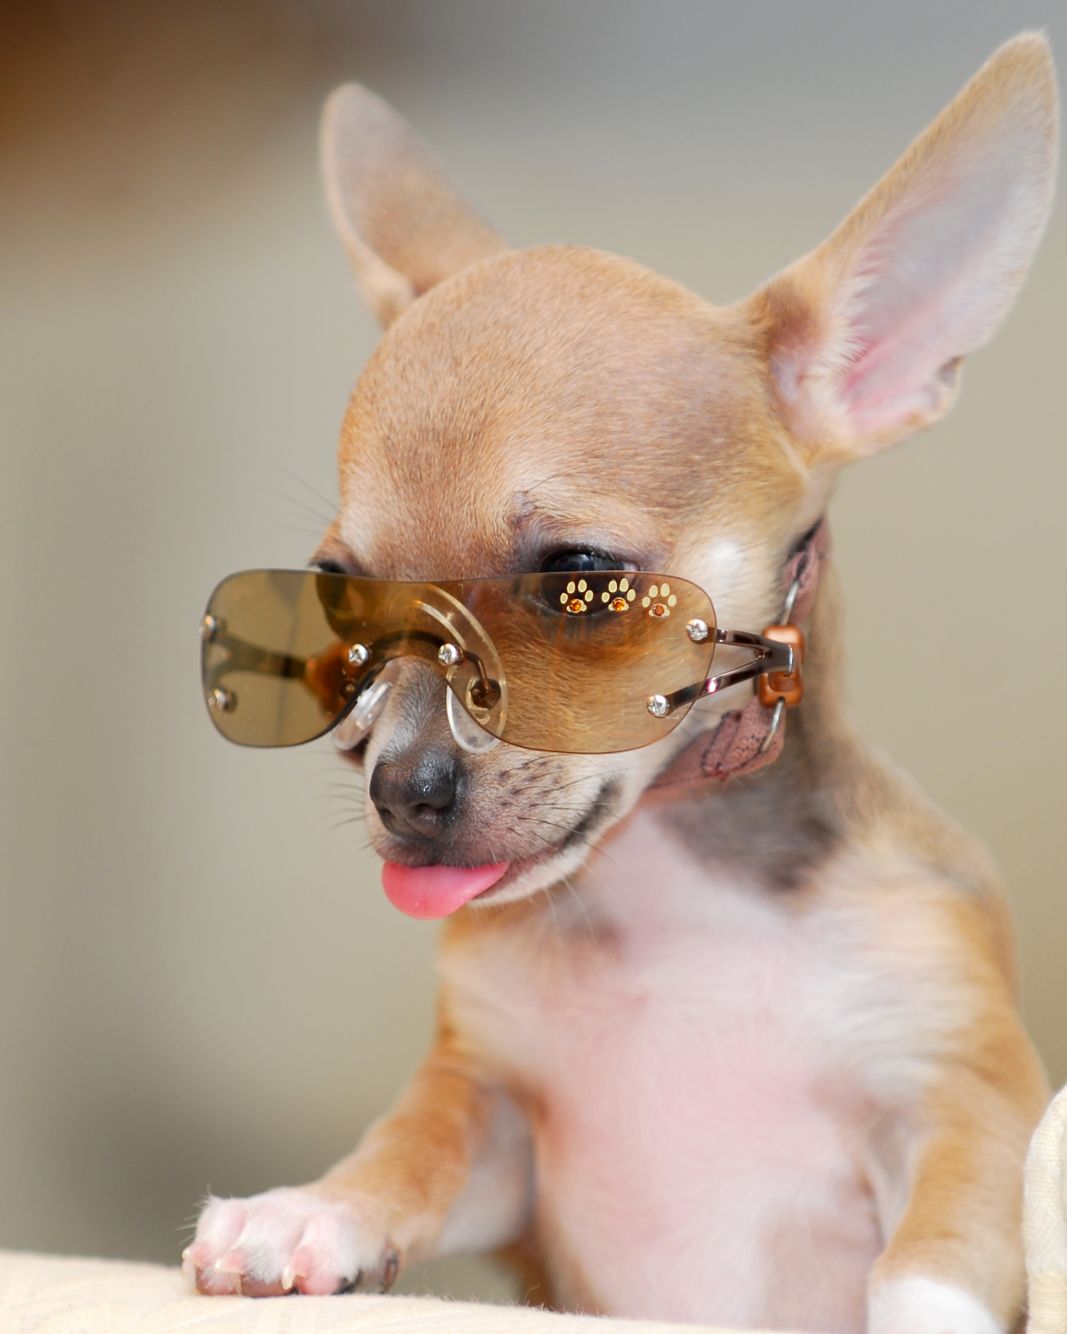 7. Enough with the Doggles! by Kendall